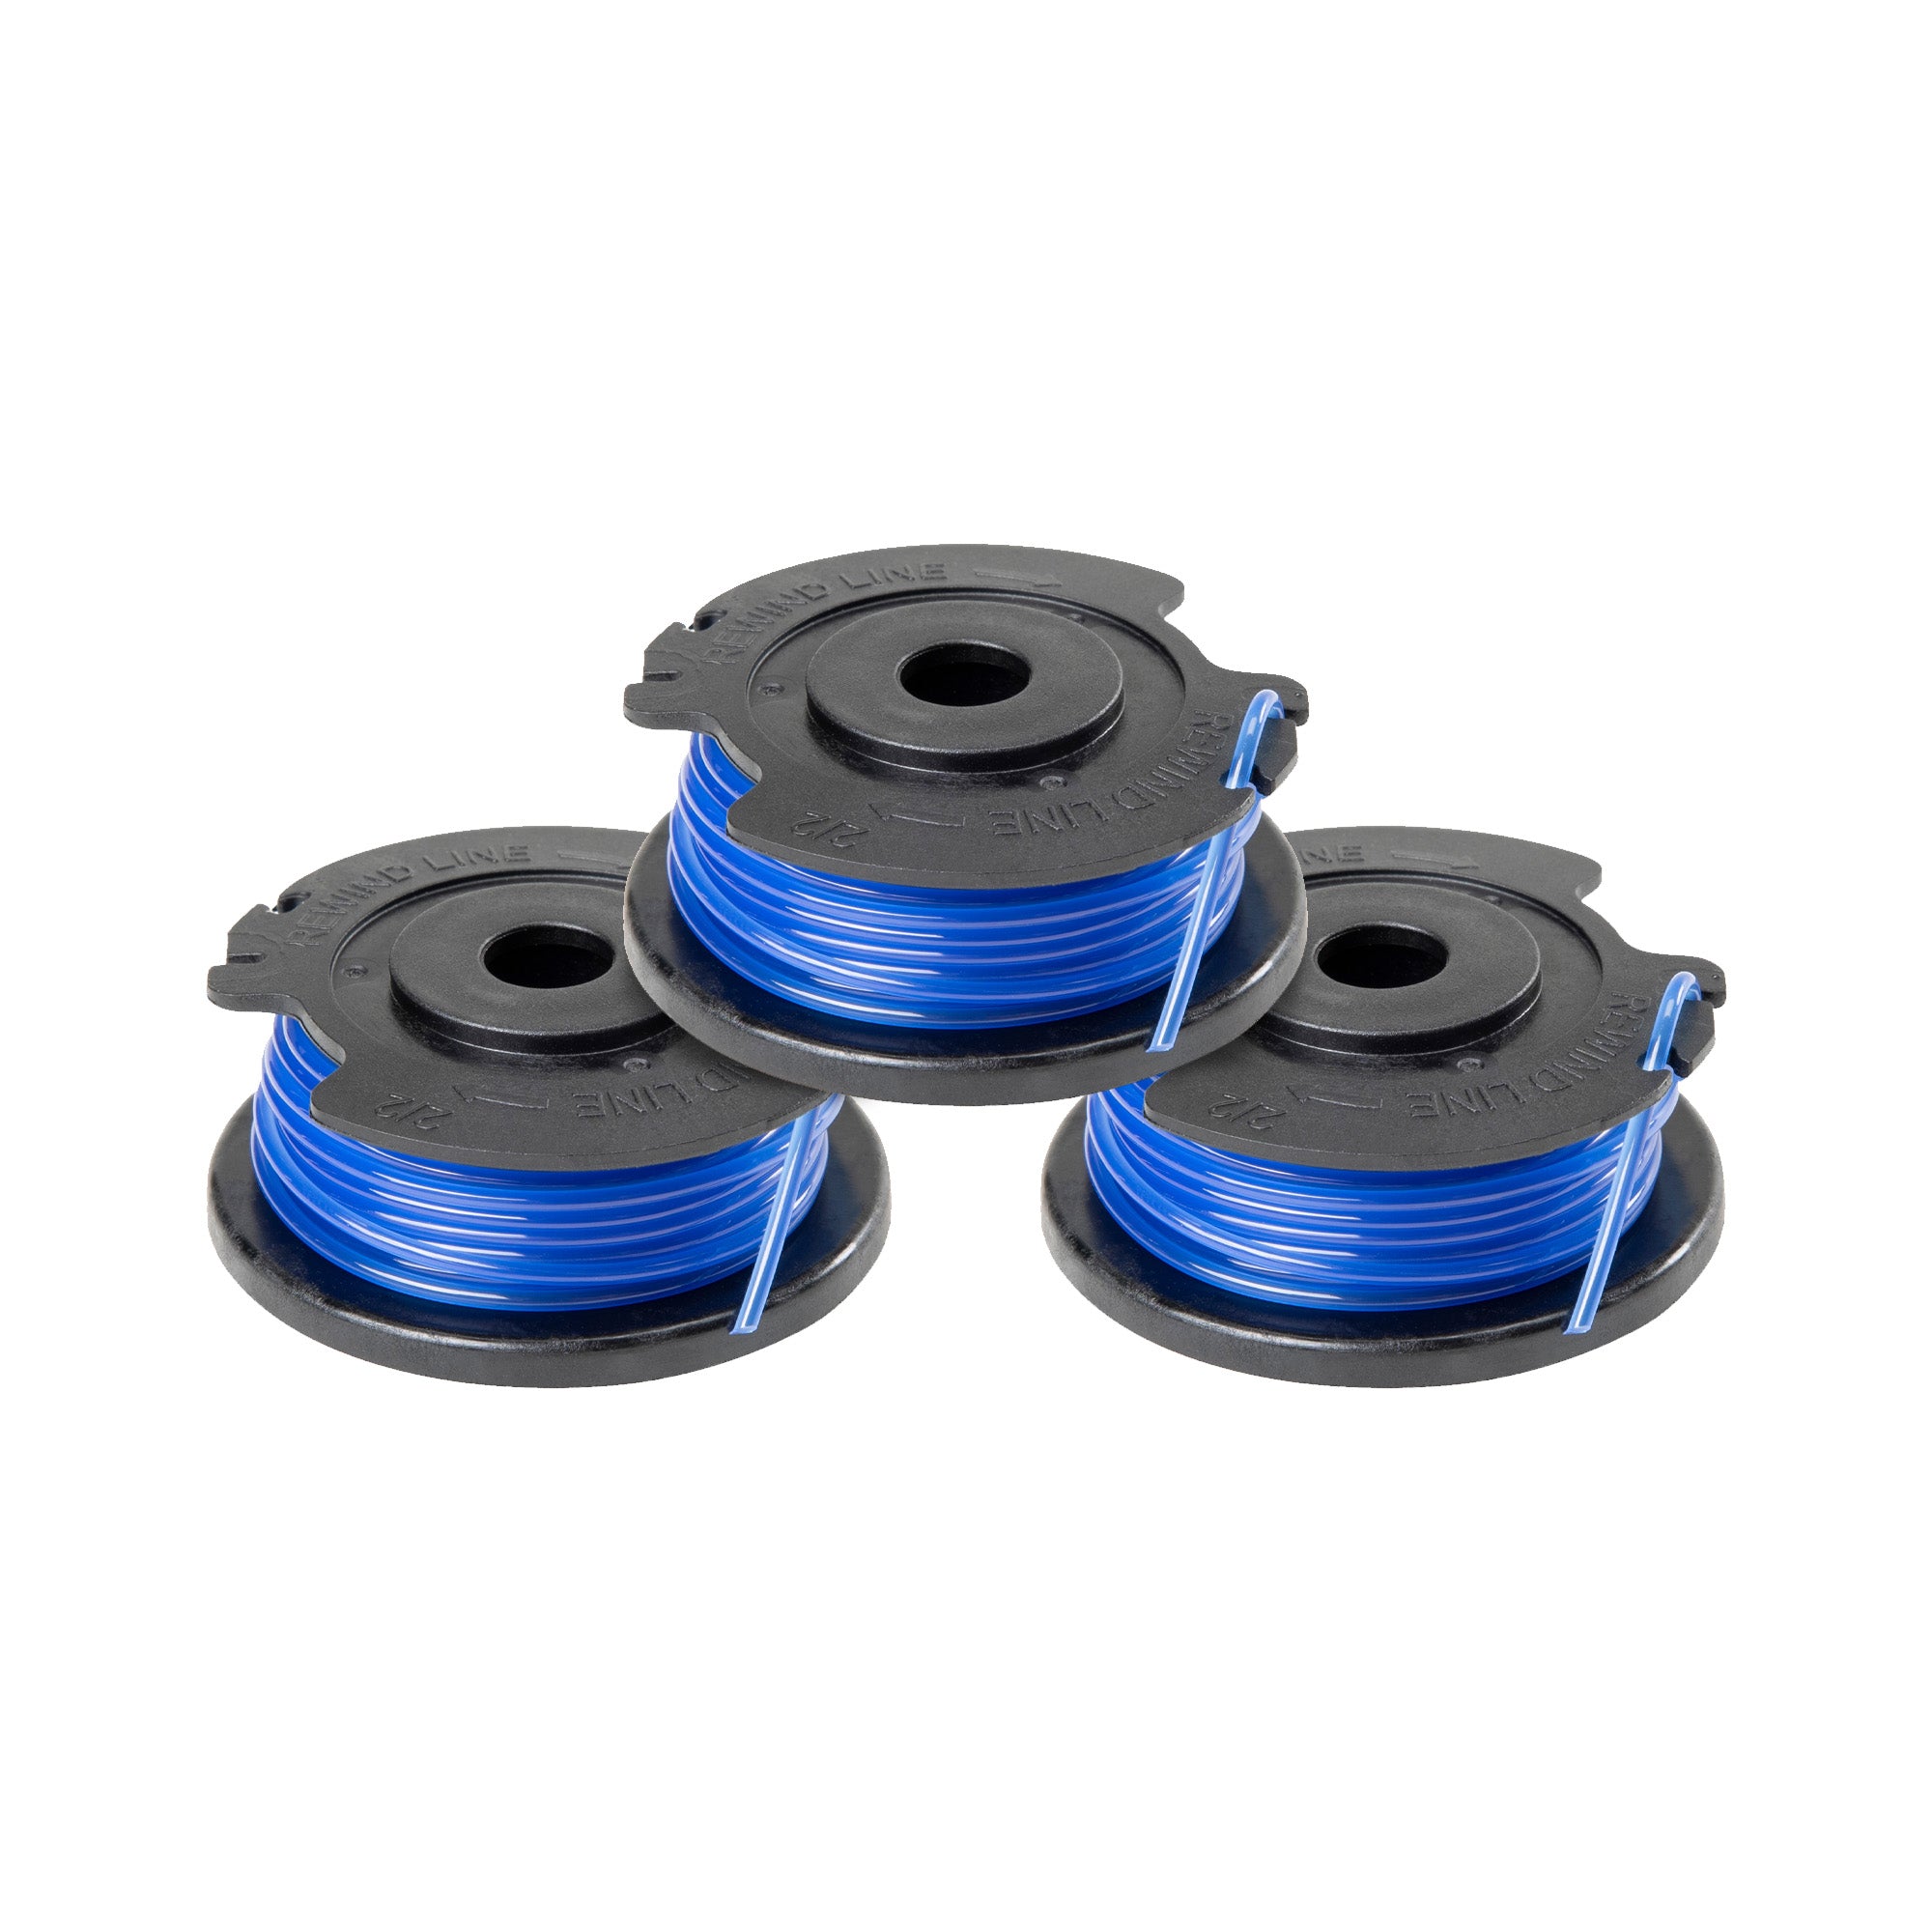  GH3000 Trimmer Replacement Spools Compatible with